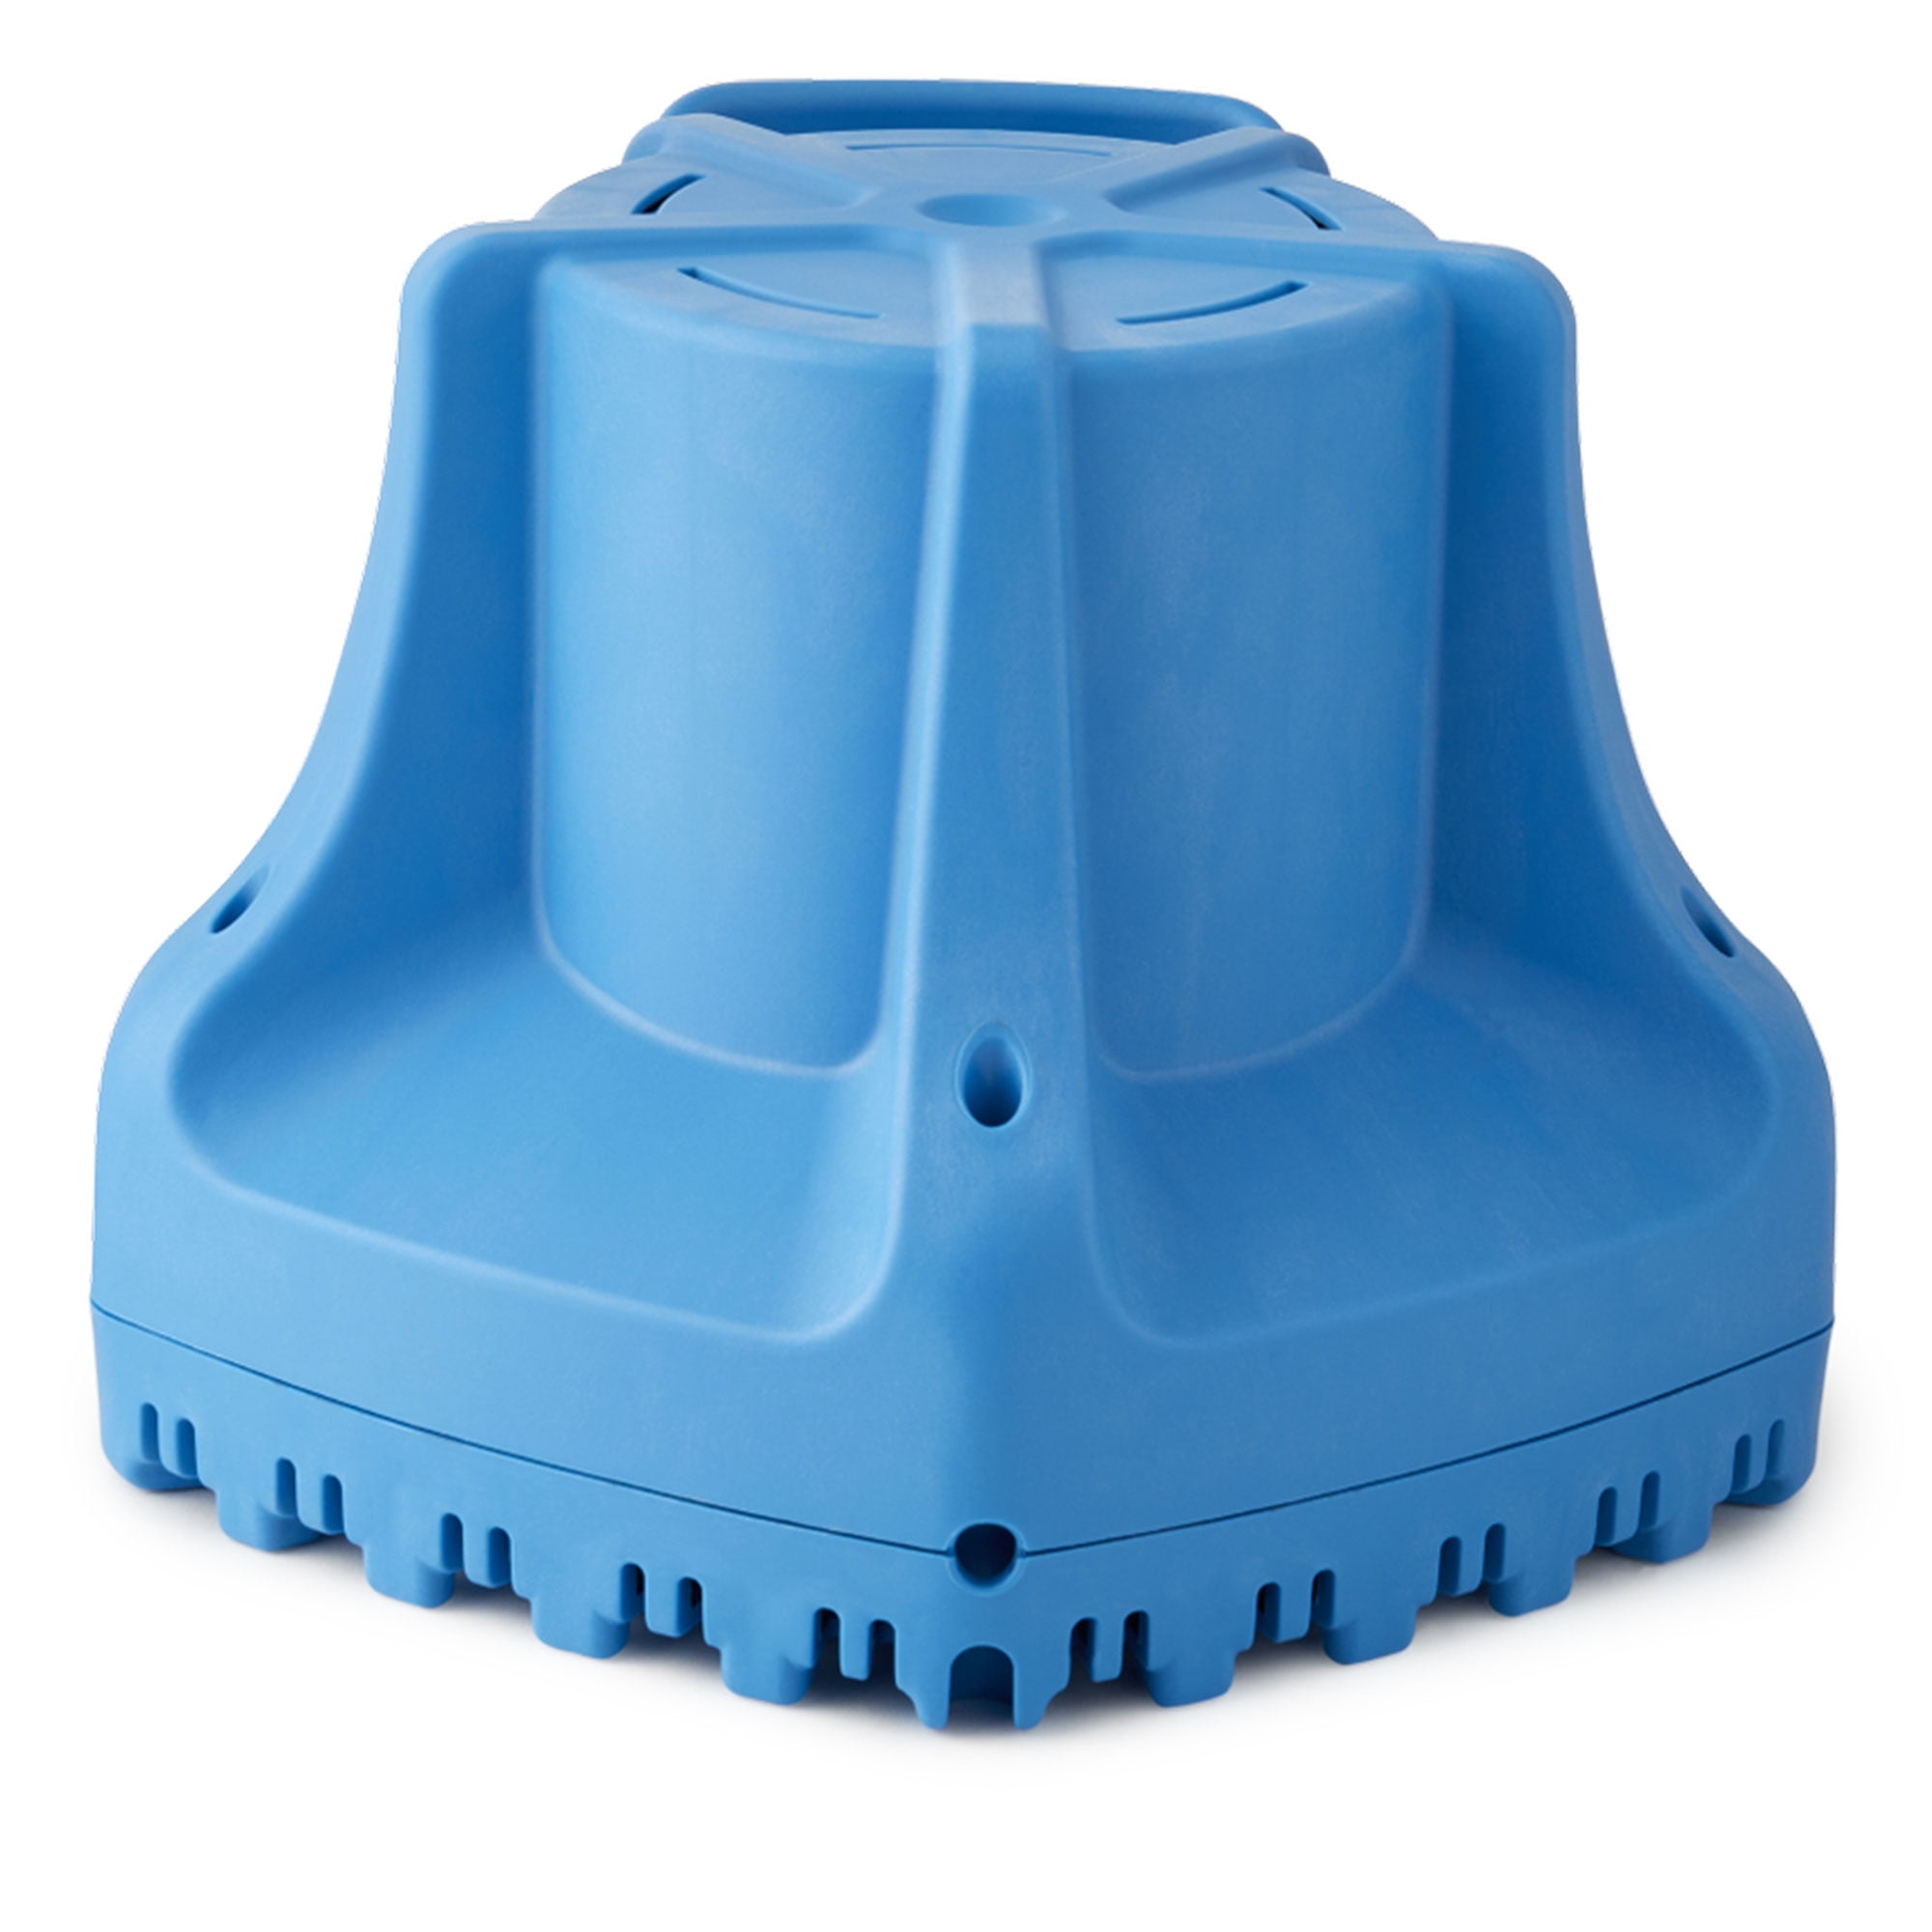 Little Giant APCP-1700 Automatic Swimming Pool Water Pump for sale online 